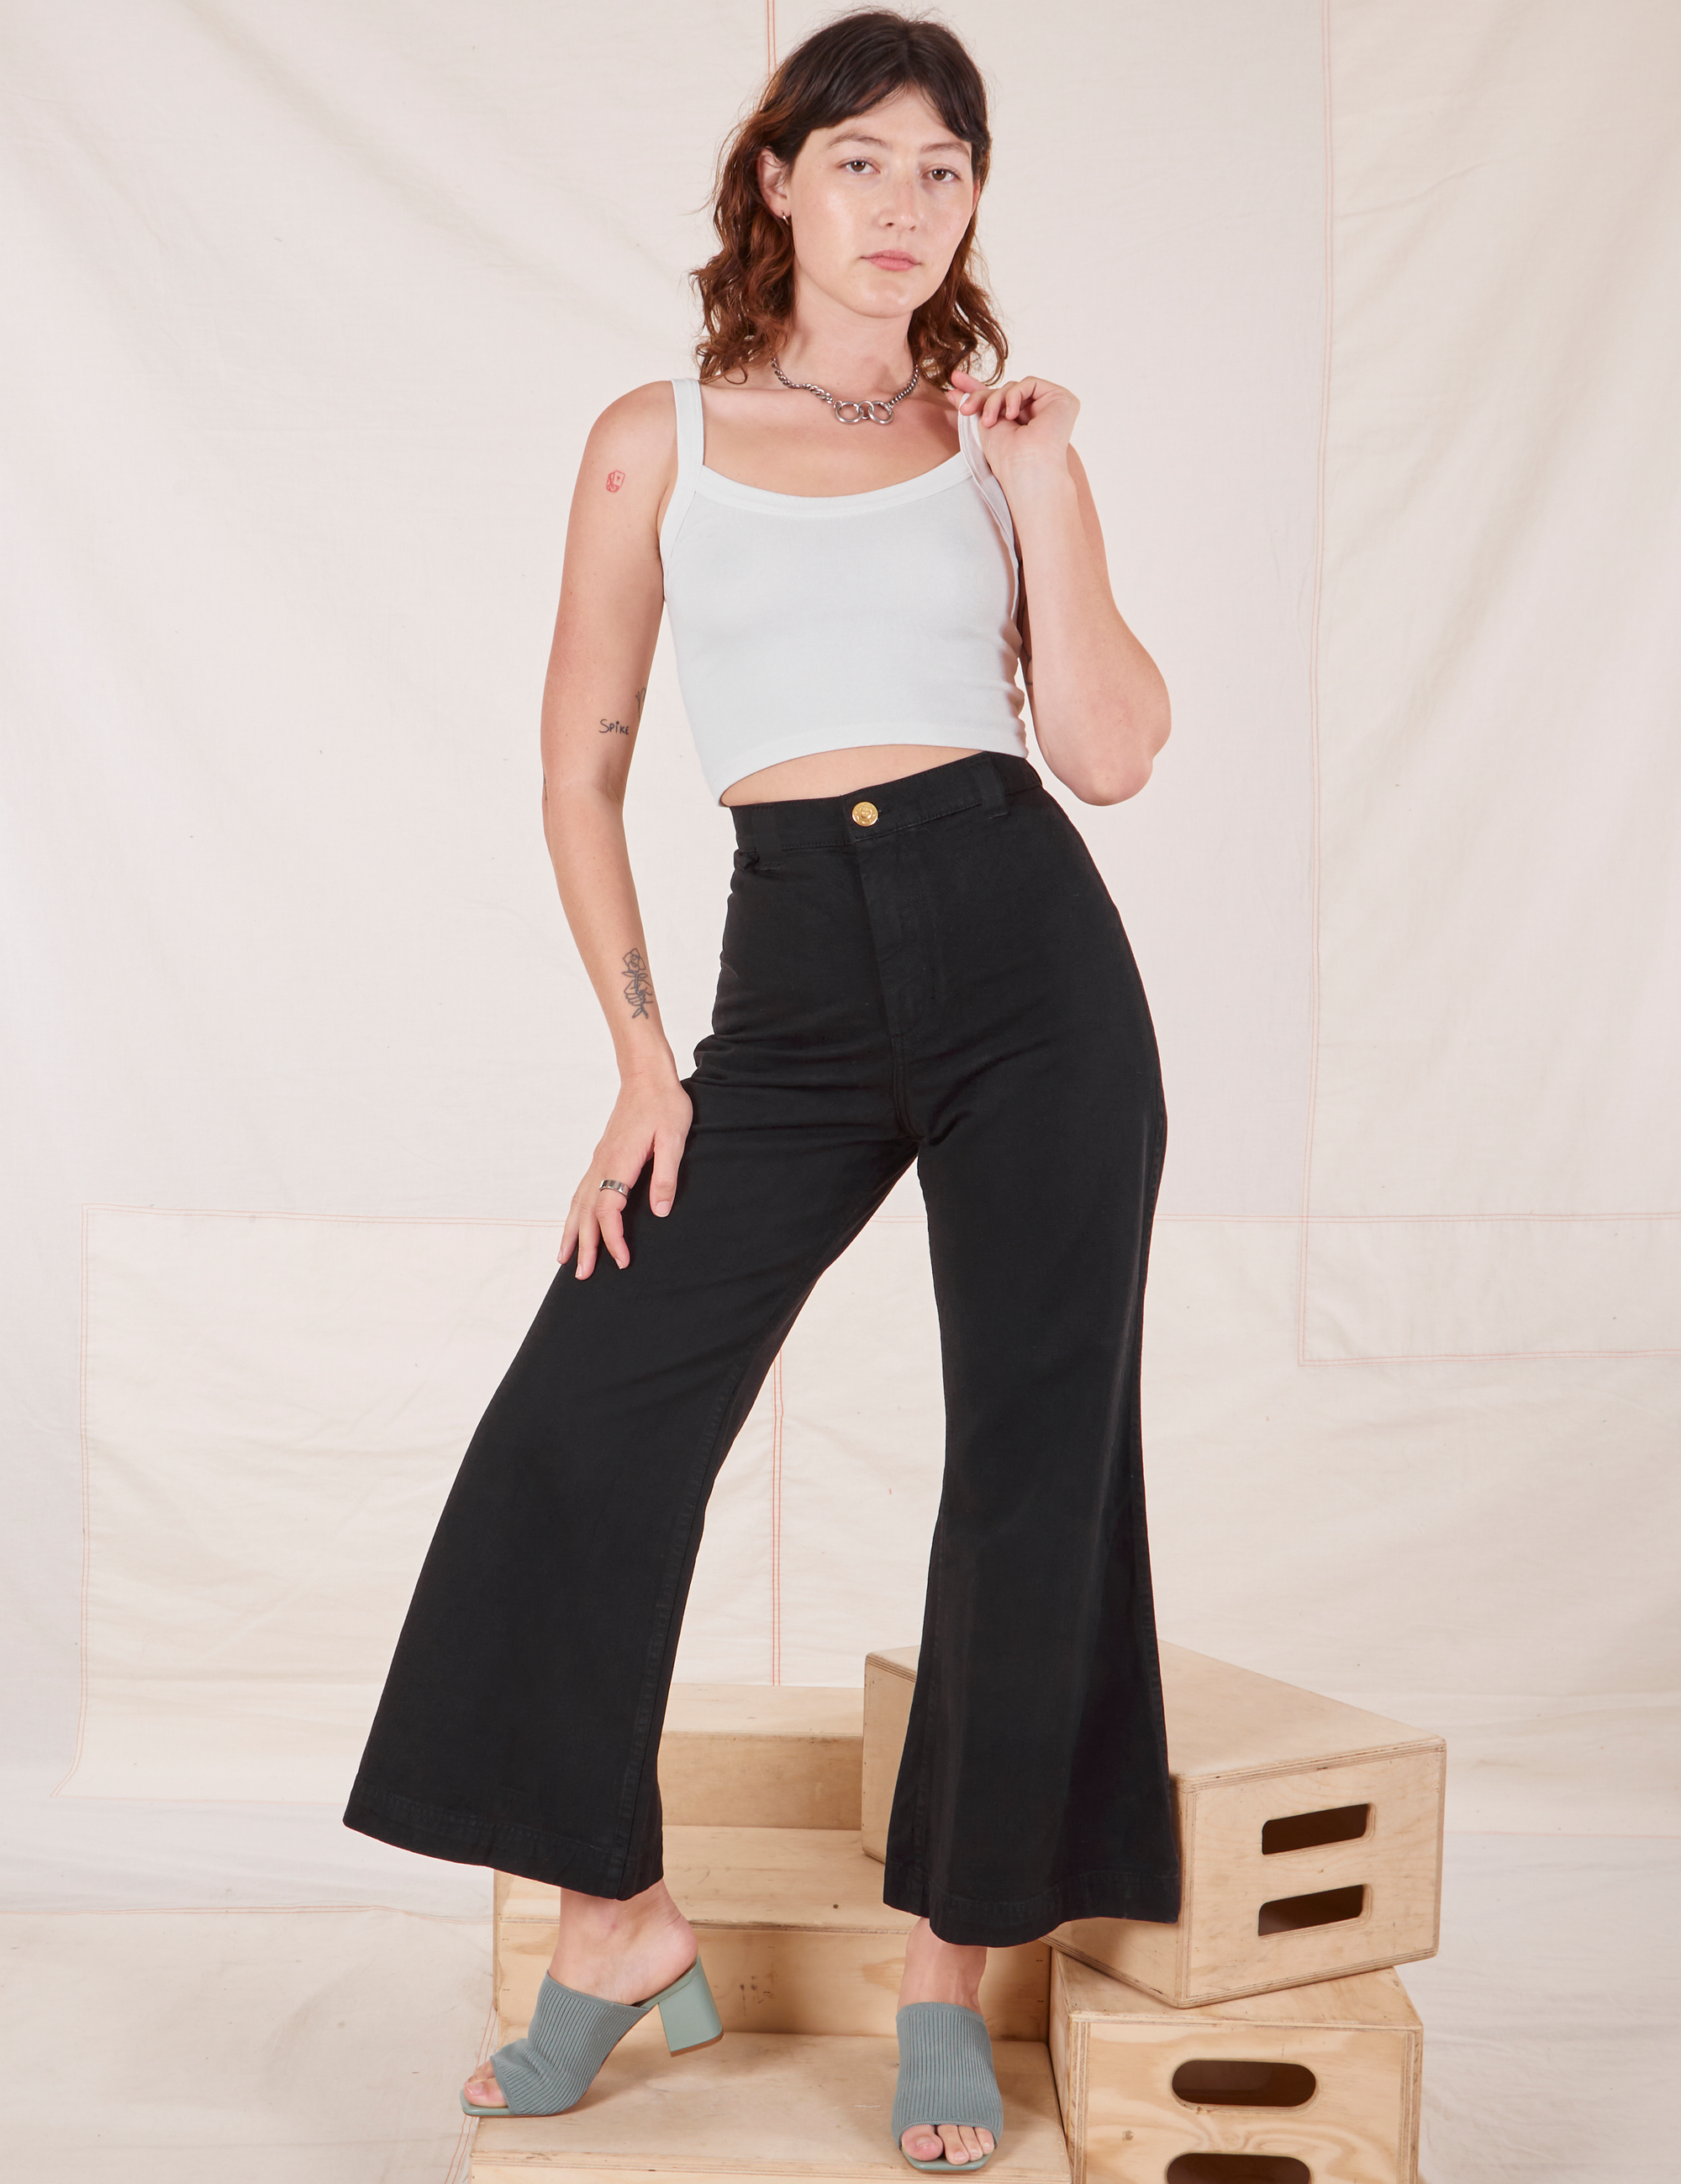 Alex is 5&#39;8&quot; and wearing XXS Bell Bottoms in Basic Black paired with vintage off-white Cami